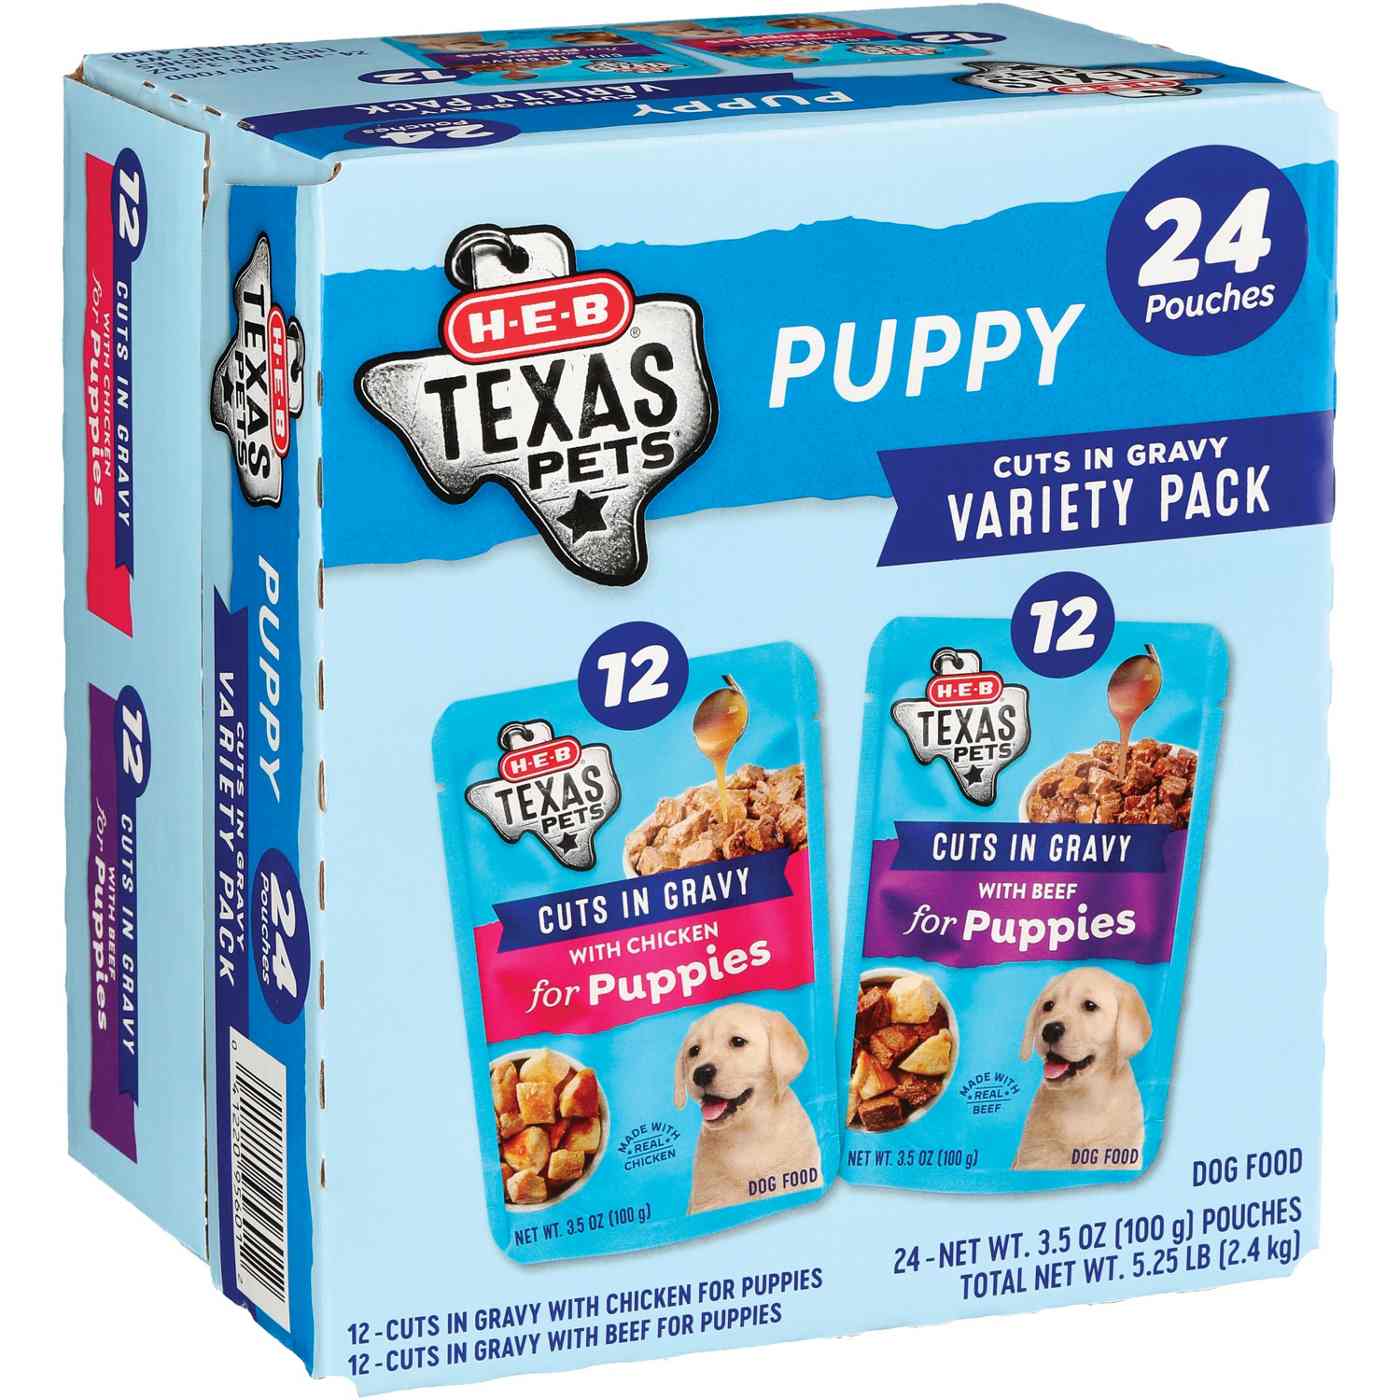 H-E-B Texas Pets Cuts in Gravy Wet Puppy Dog Food Pouches Variety Pack - Chicken & Beef; image 2 of 2